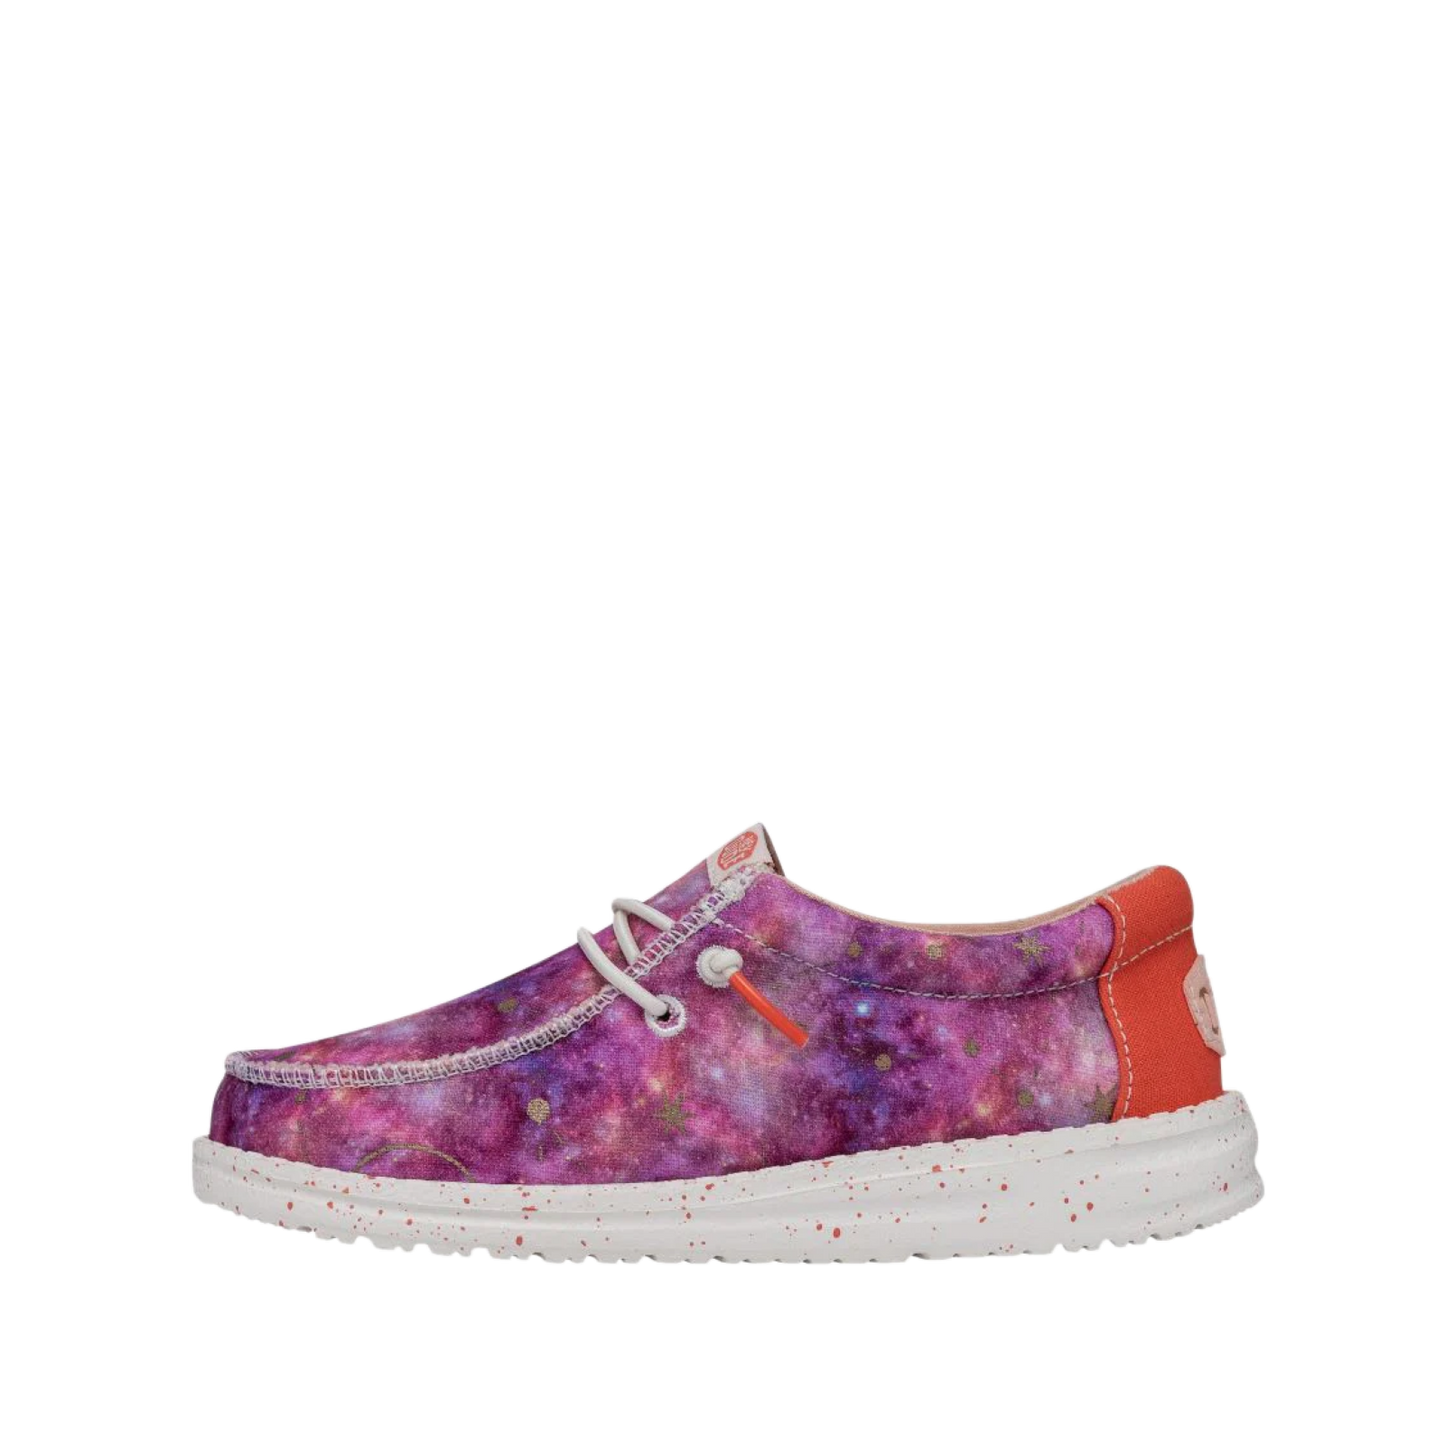 Hey Dude Youth Girl's Wally Pink Multi Galaxy Casual Shoes 40420-9DD